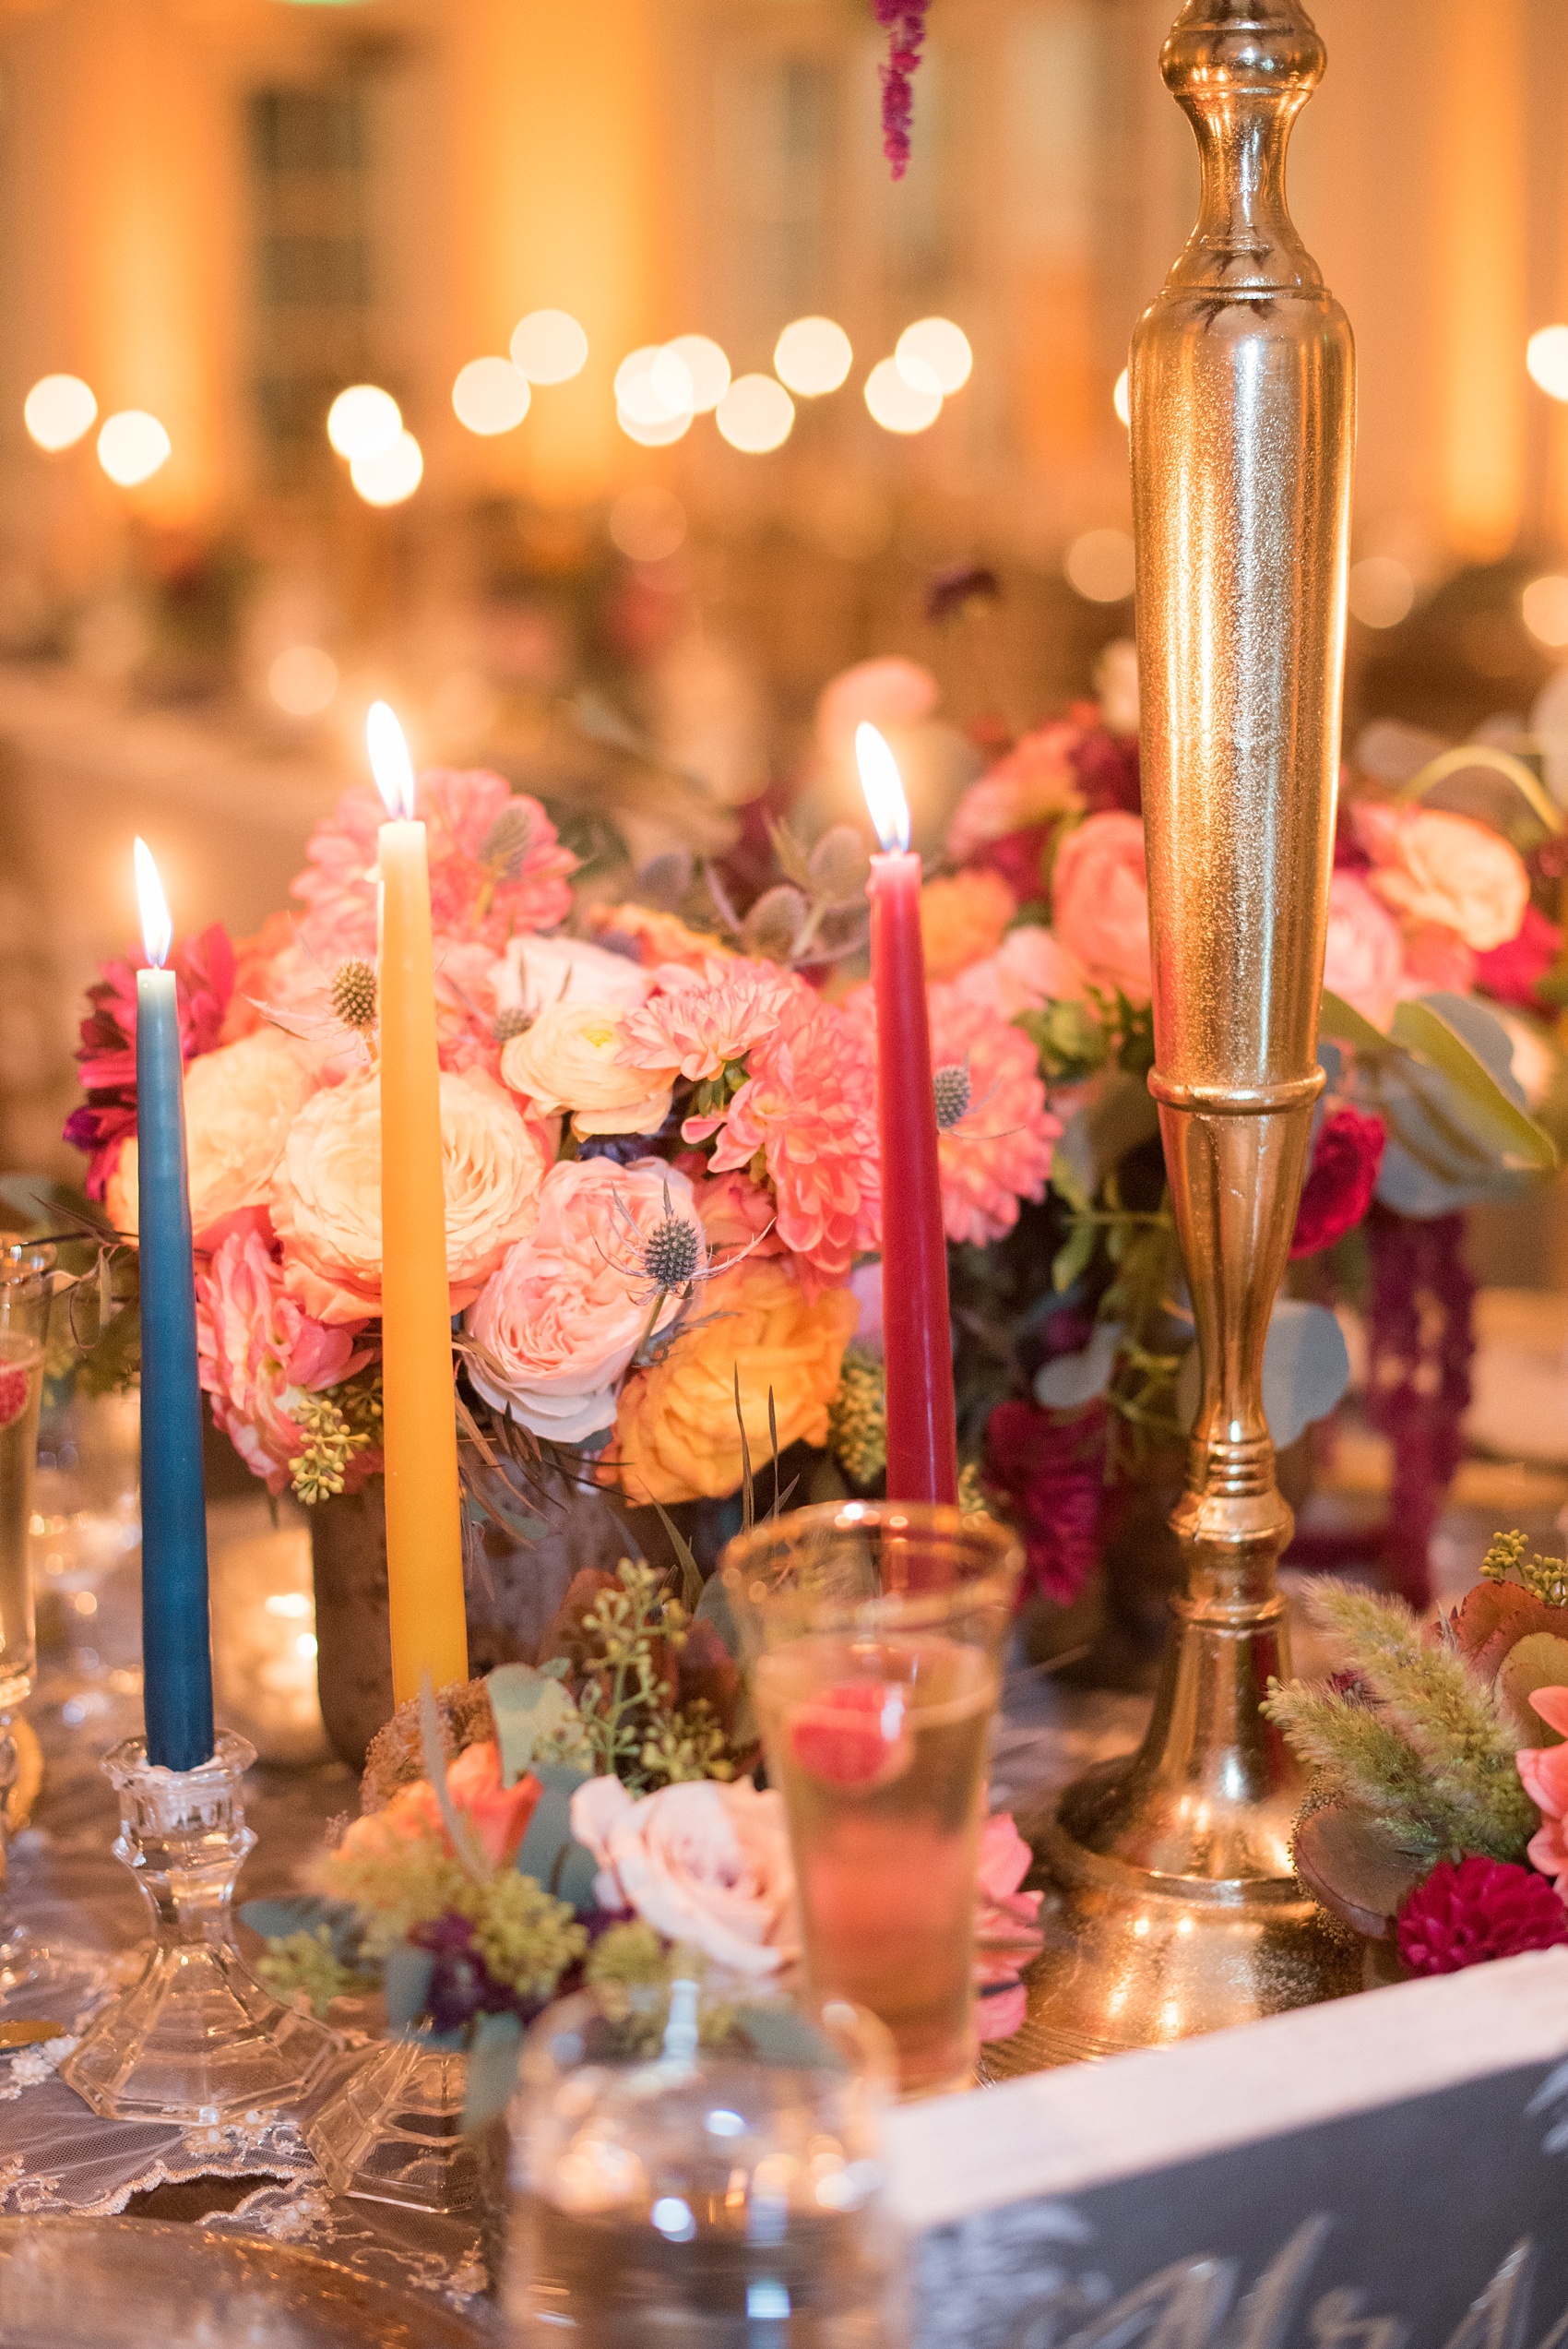 Mikkel Paige Photography photos from a Merrimon-Wynne House wedding in Raleigh. The reception was drenched in romantic candlelight, inside the Carriage House. Tables were decorated with fall flower centerpieces and colorful tapered candles by Meristem Floral.